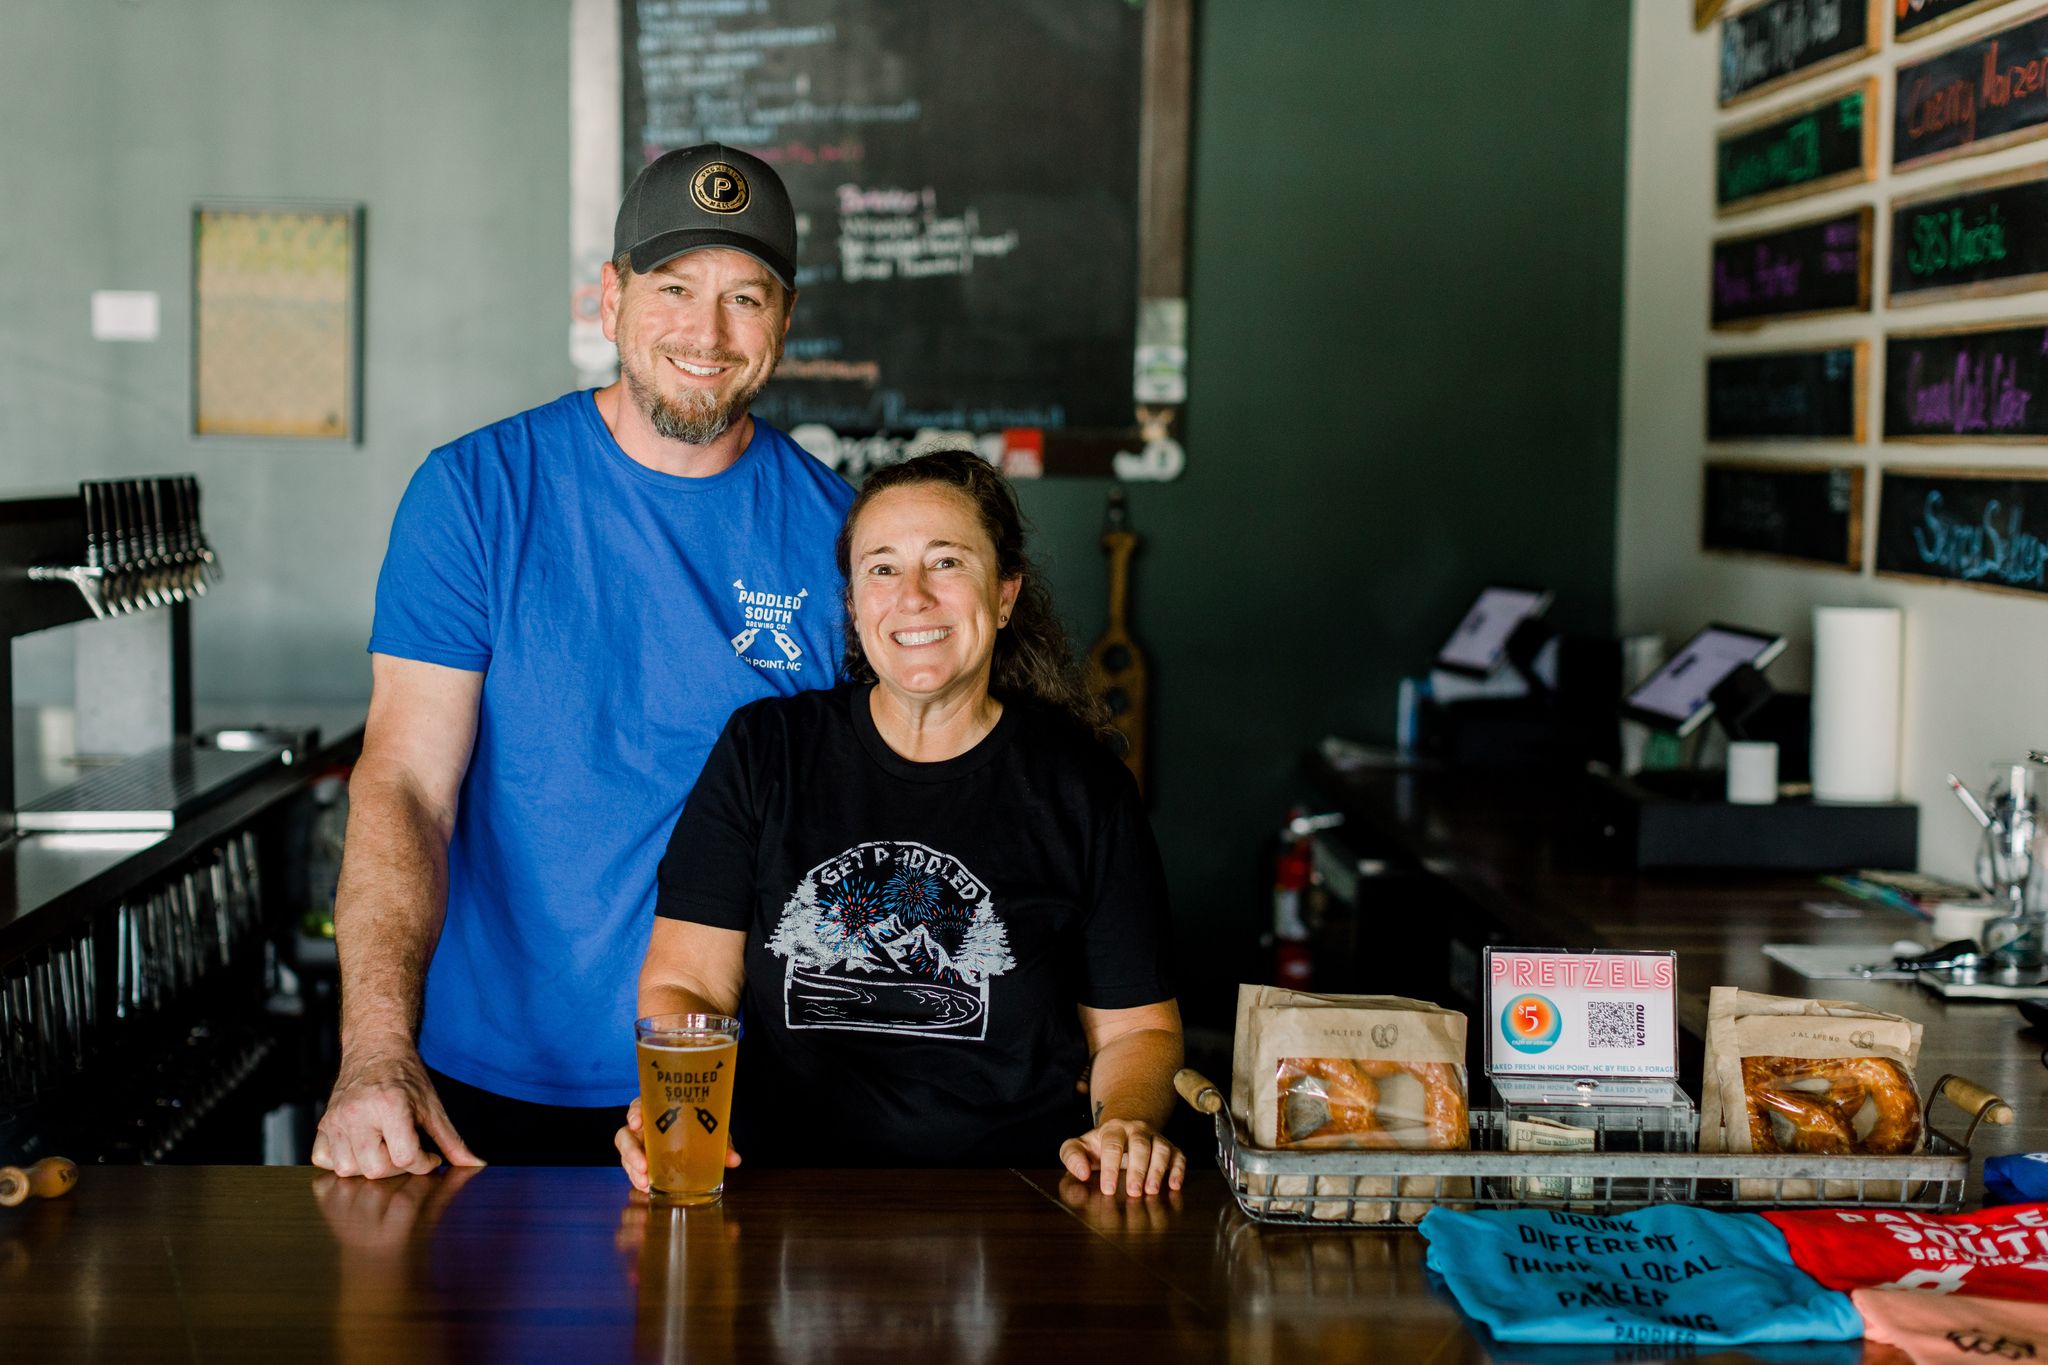 Dave and Amy Nissen, owners of Paddled South Brewing Co., in High Point, NC stand at the bar.